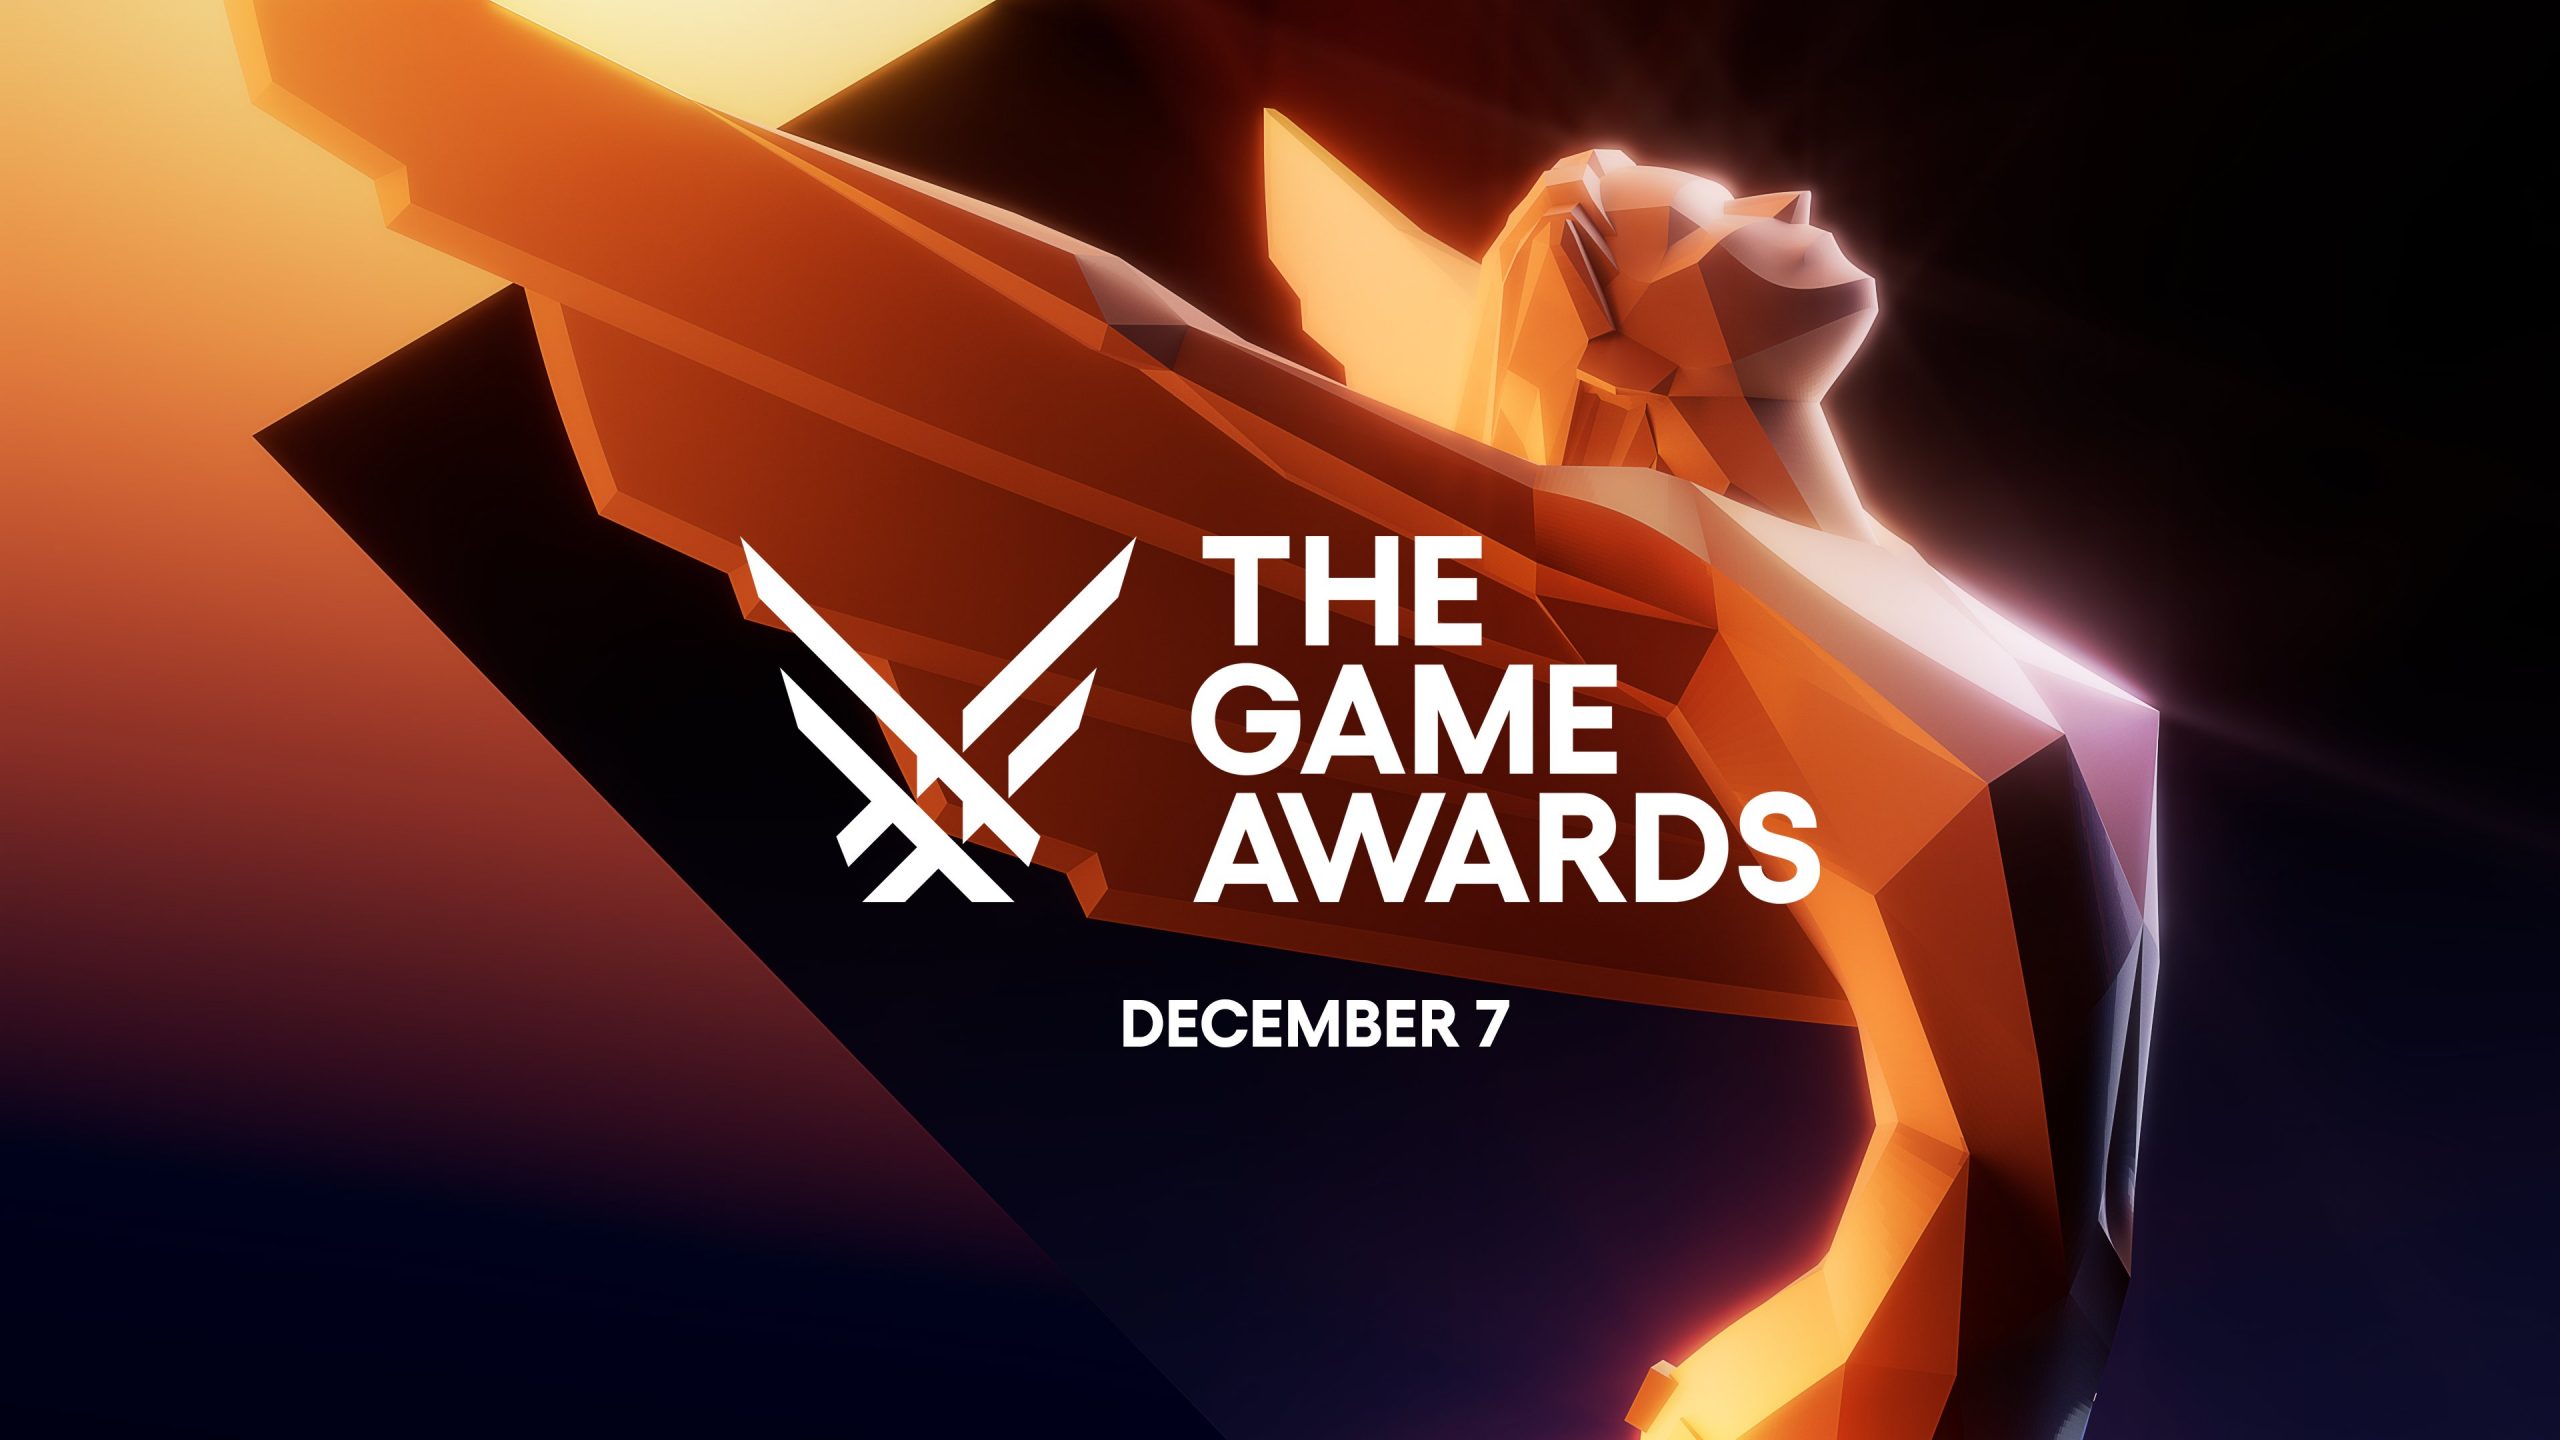 Winners of the Esquire 2022 gaming awards revealed - My Nintendo News